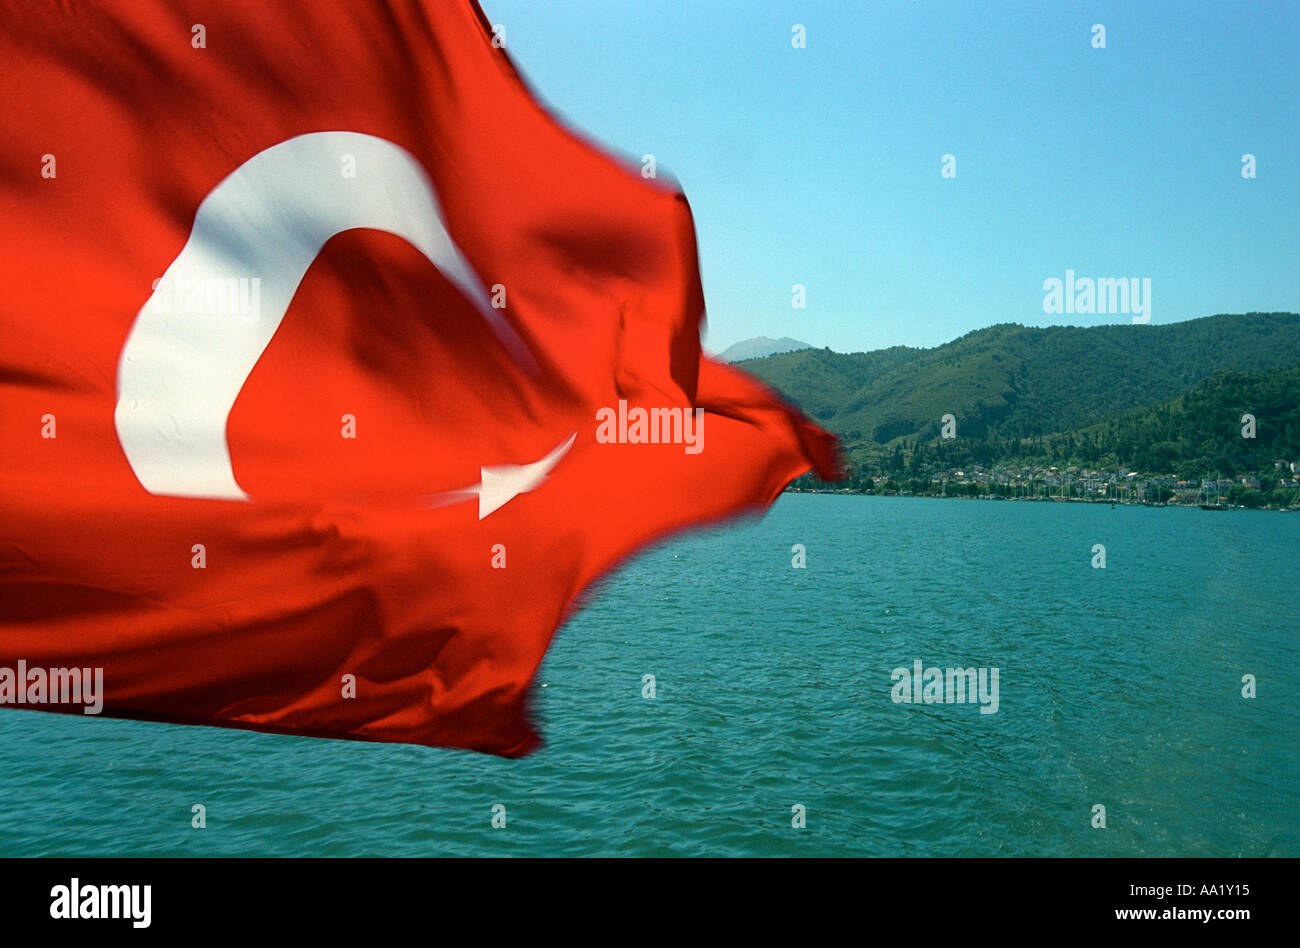 Flag of Turkey with Turkish coastline in the background Stock Photo